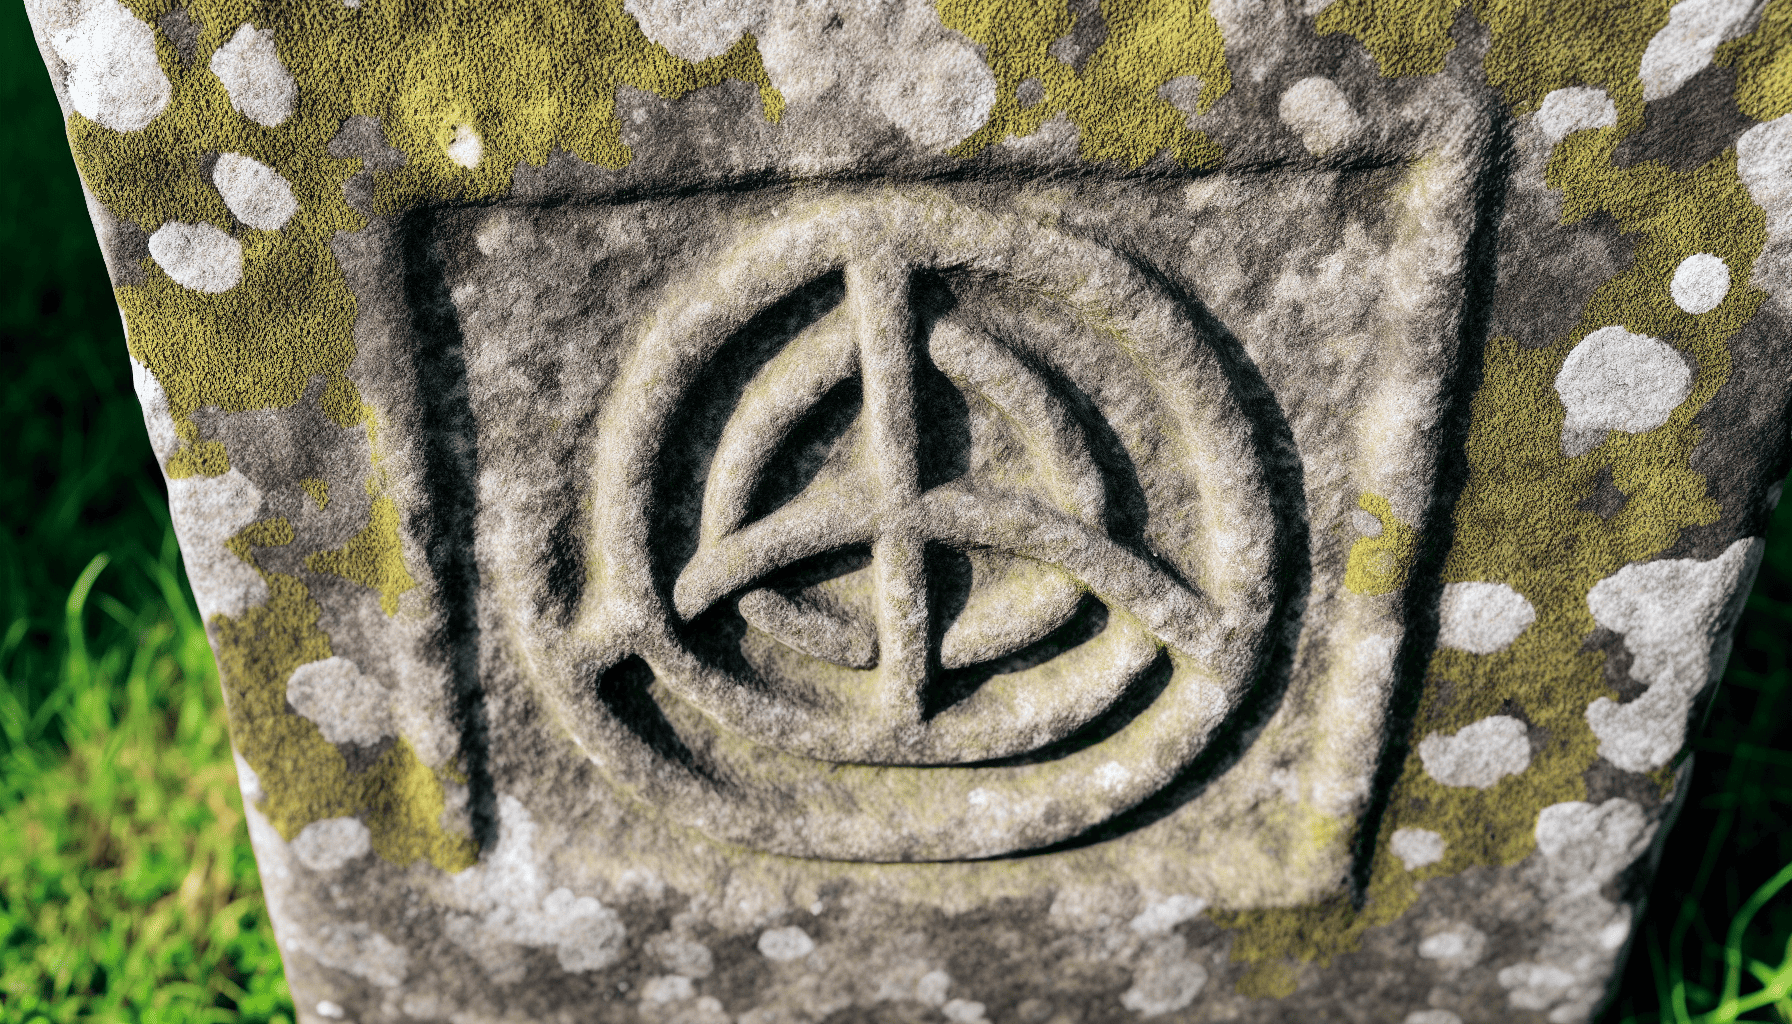 Ancient stone carving with a Triquetra symbol, representing interconnectedness and the power of three